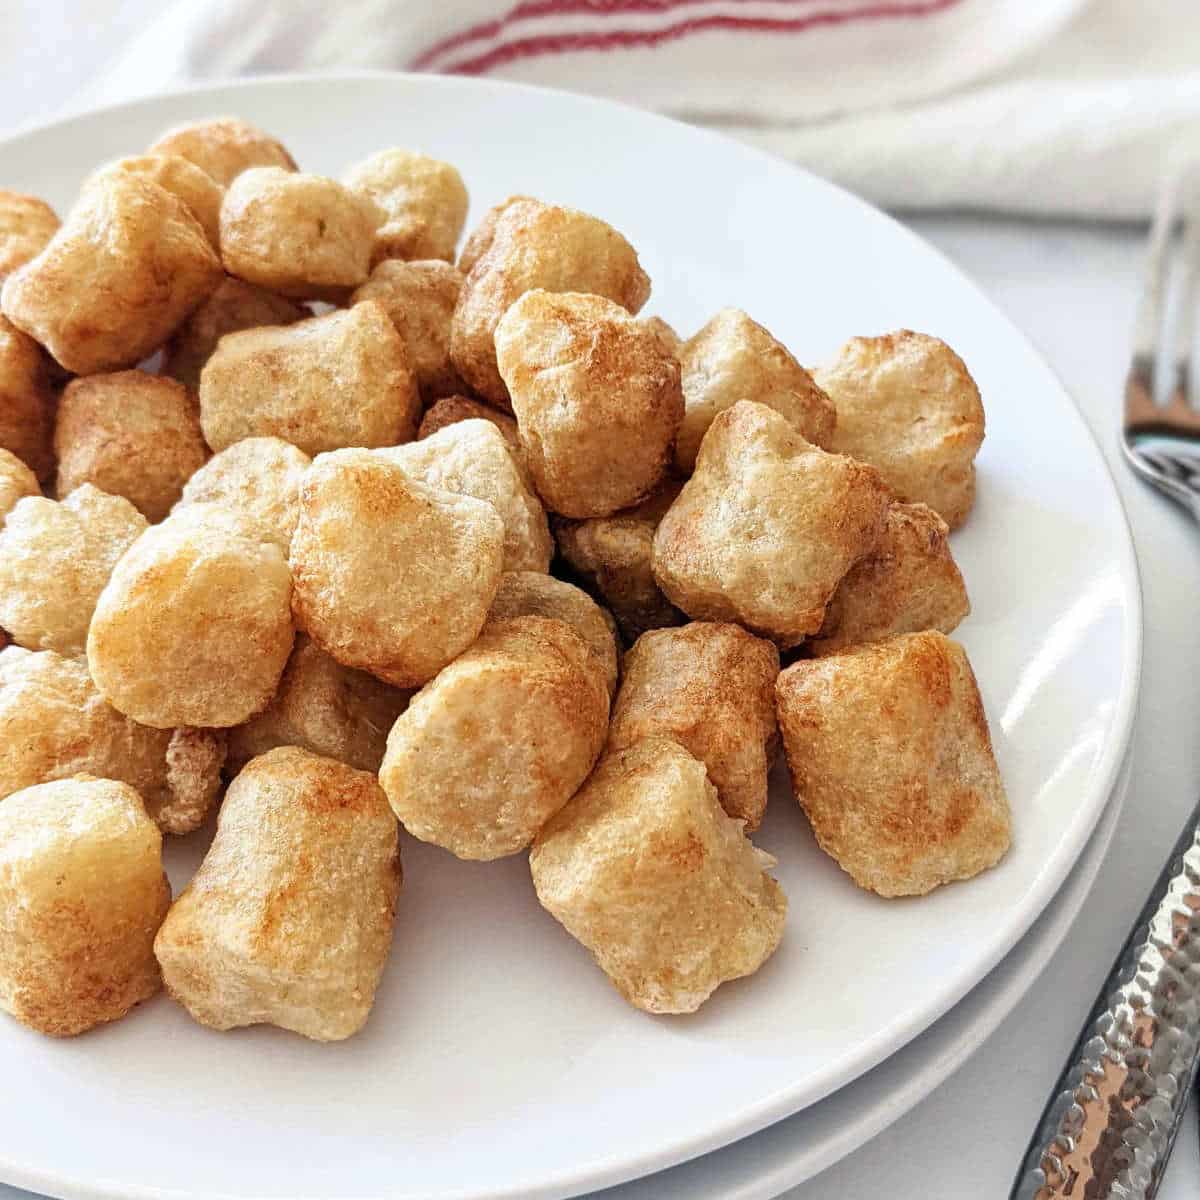 Golden air fried gnocchi piled on a plate.